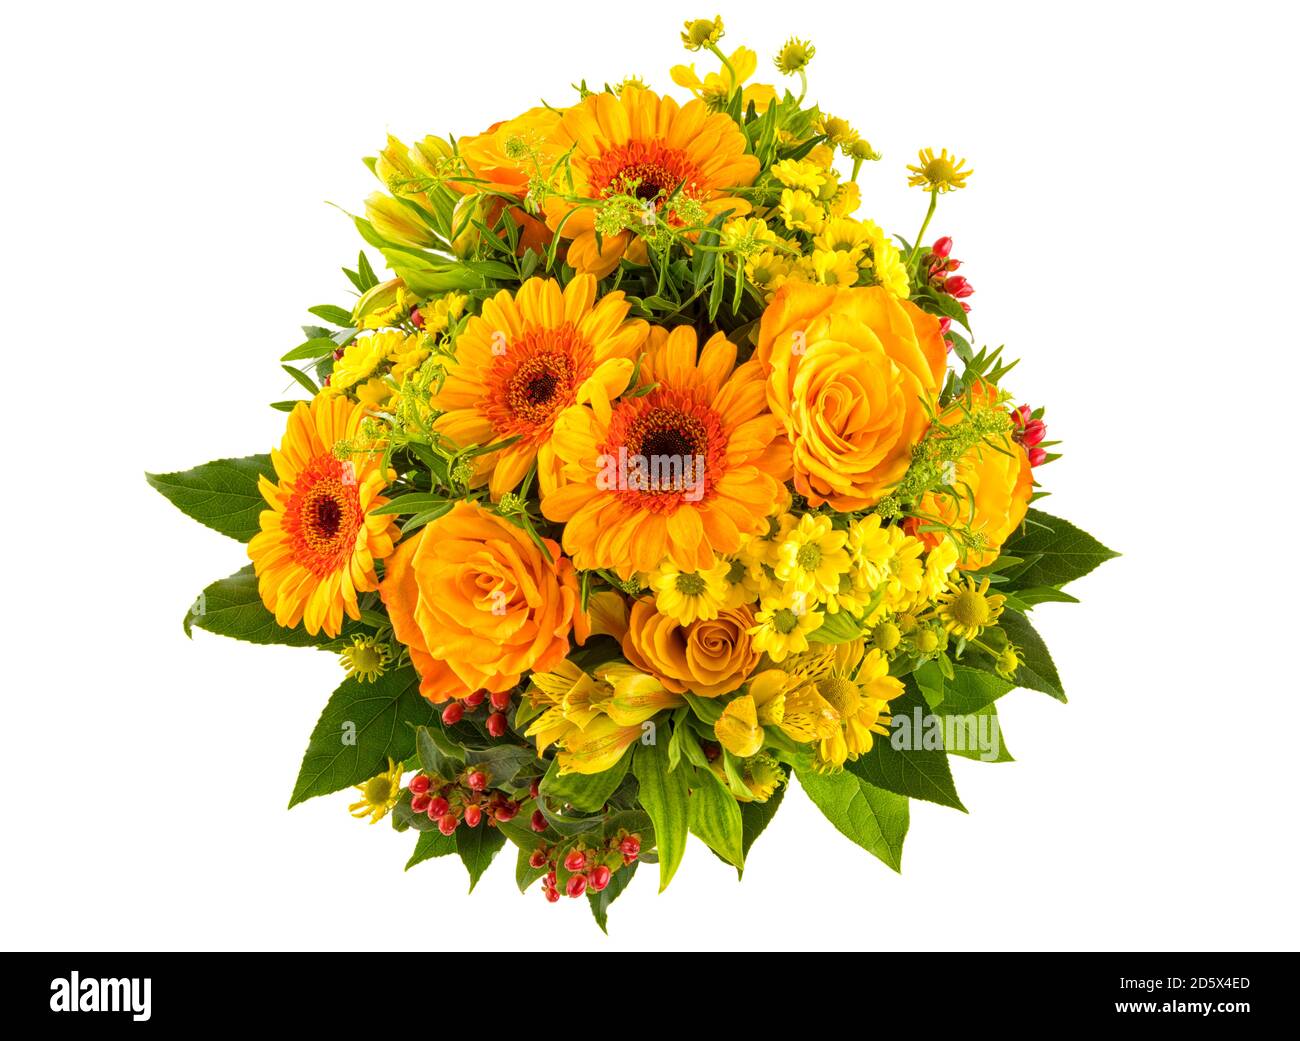 Autumnal flowers bouquet with yellow and orange helenium, peruvian lilies, rose and gerber blossoms, myrtles, top view isolated on white background Stock Photo